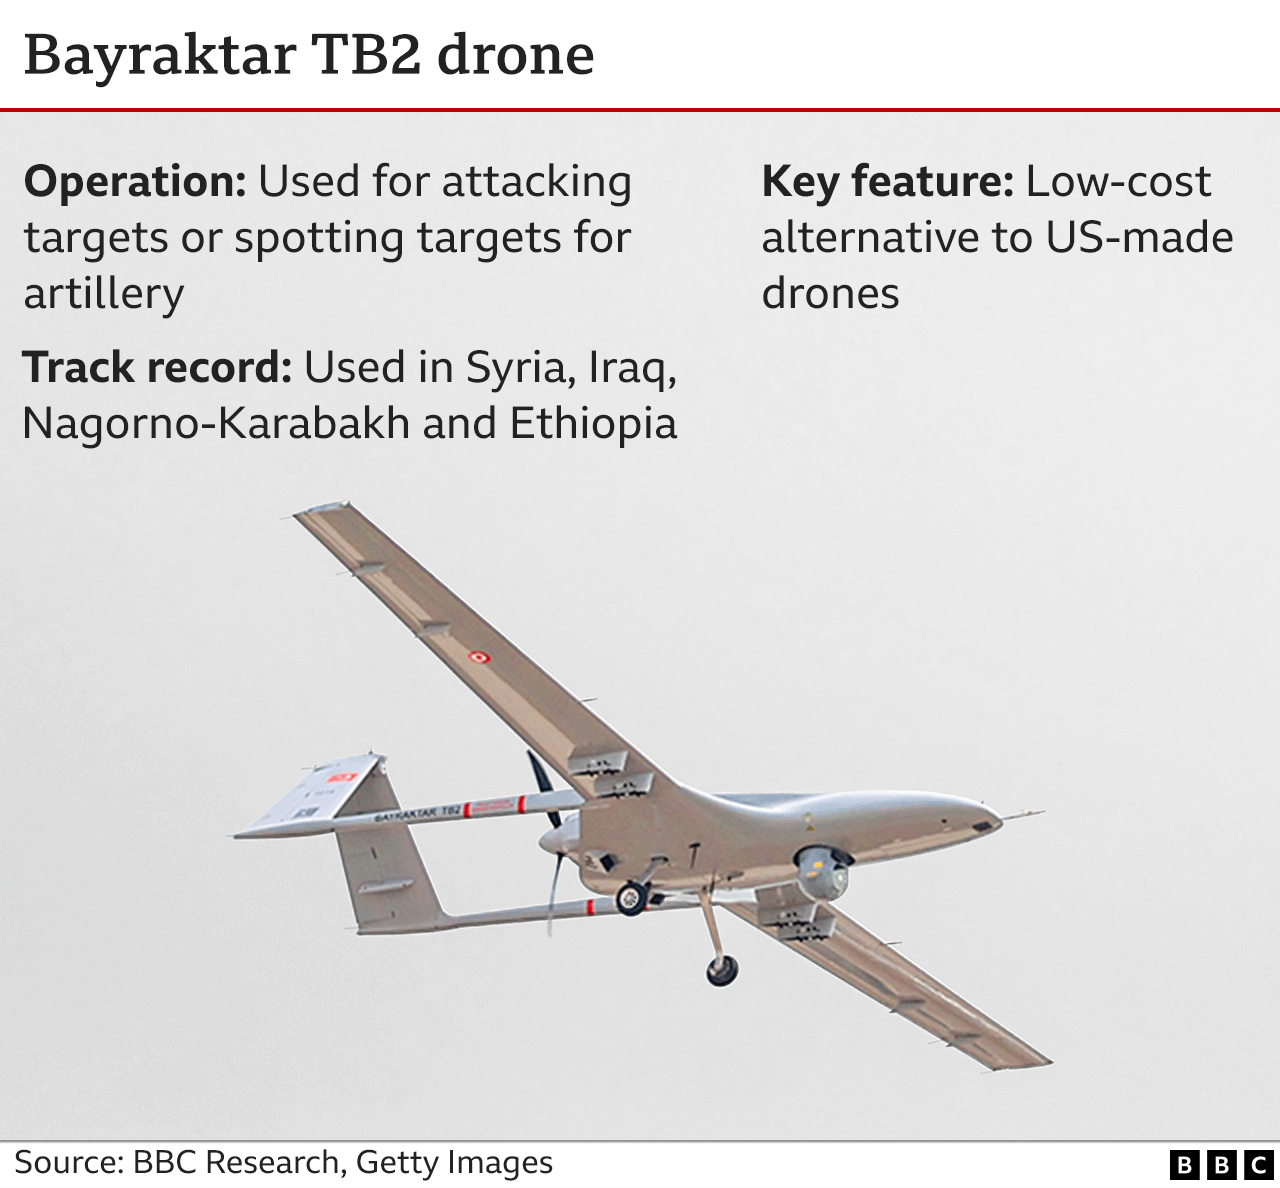 Graphic showing characteristics of the Bayraktar TB2 drone. The Bayraktar TB2 is a low-cost alternative to US-made drones and can be used to directly attack or coordinate attacks with other systems on targets.